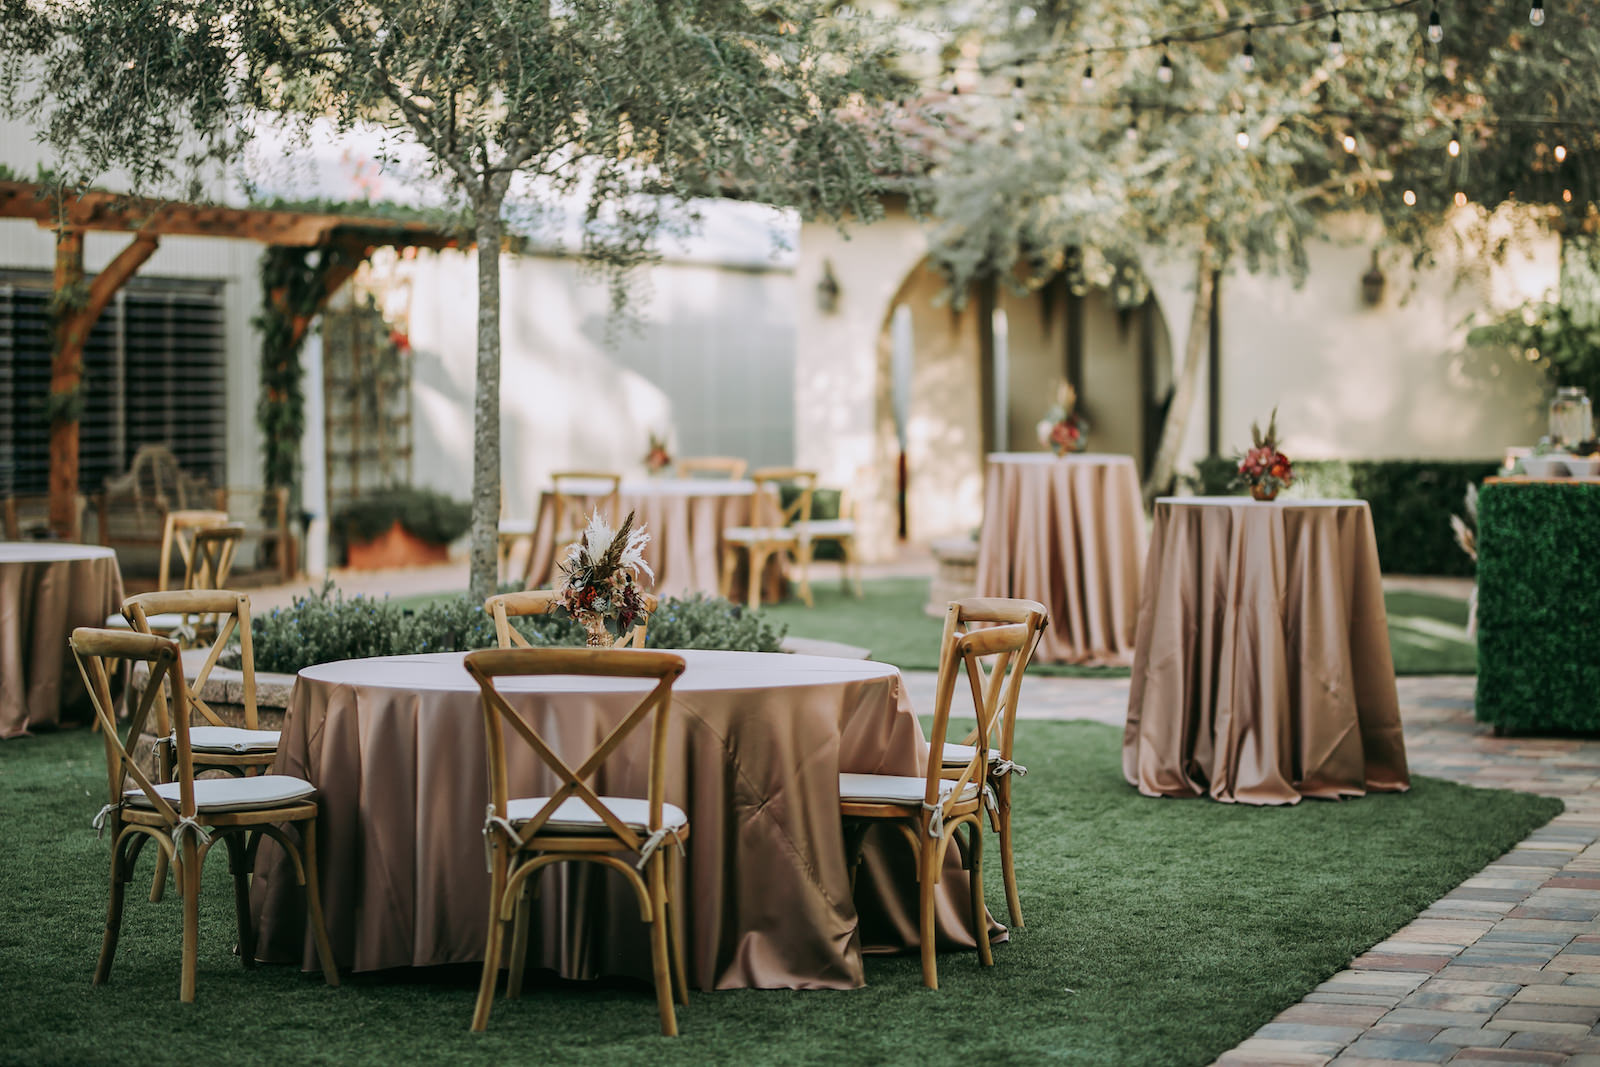 Outdoor Wedding Cocktail Hour Decor, Wooden Cross Back Chairs with Champagne/Gold/Dusty Rose Table Linen and Small Floral Centerpiece, Tall Cocktail Tables | Tampa Barn Wedding Venue Mision Lago Estate | Mision Lago Ranch